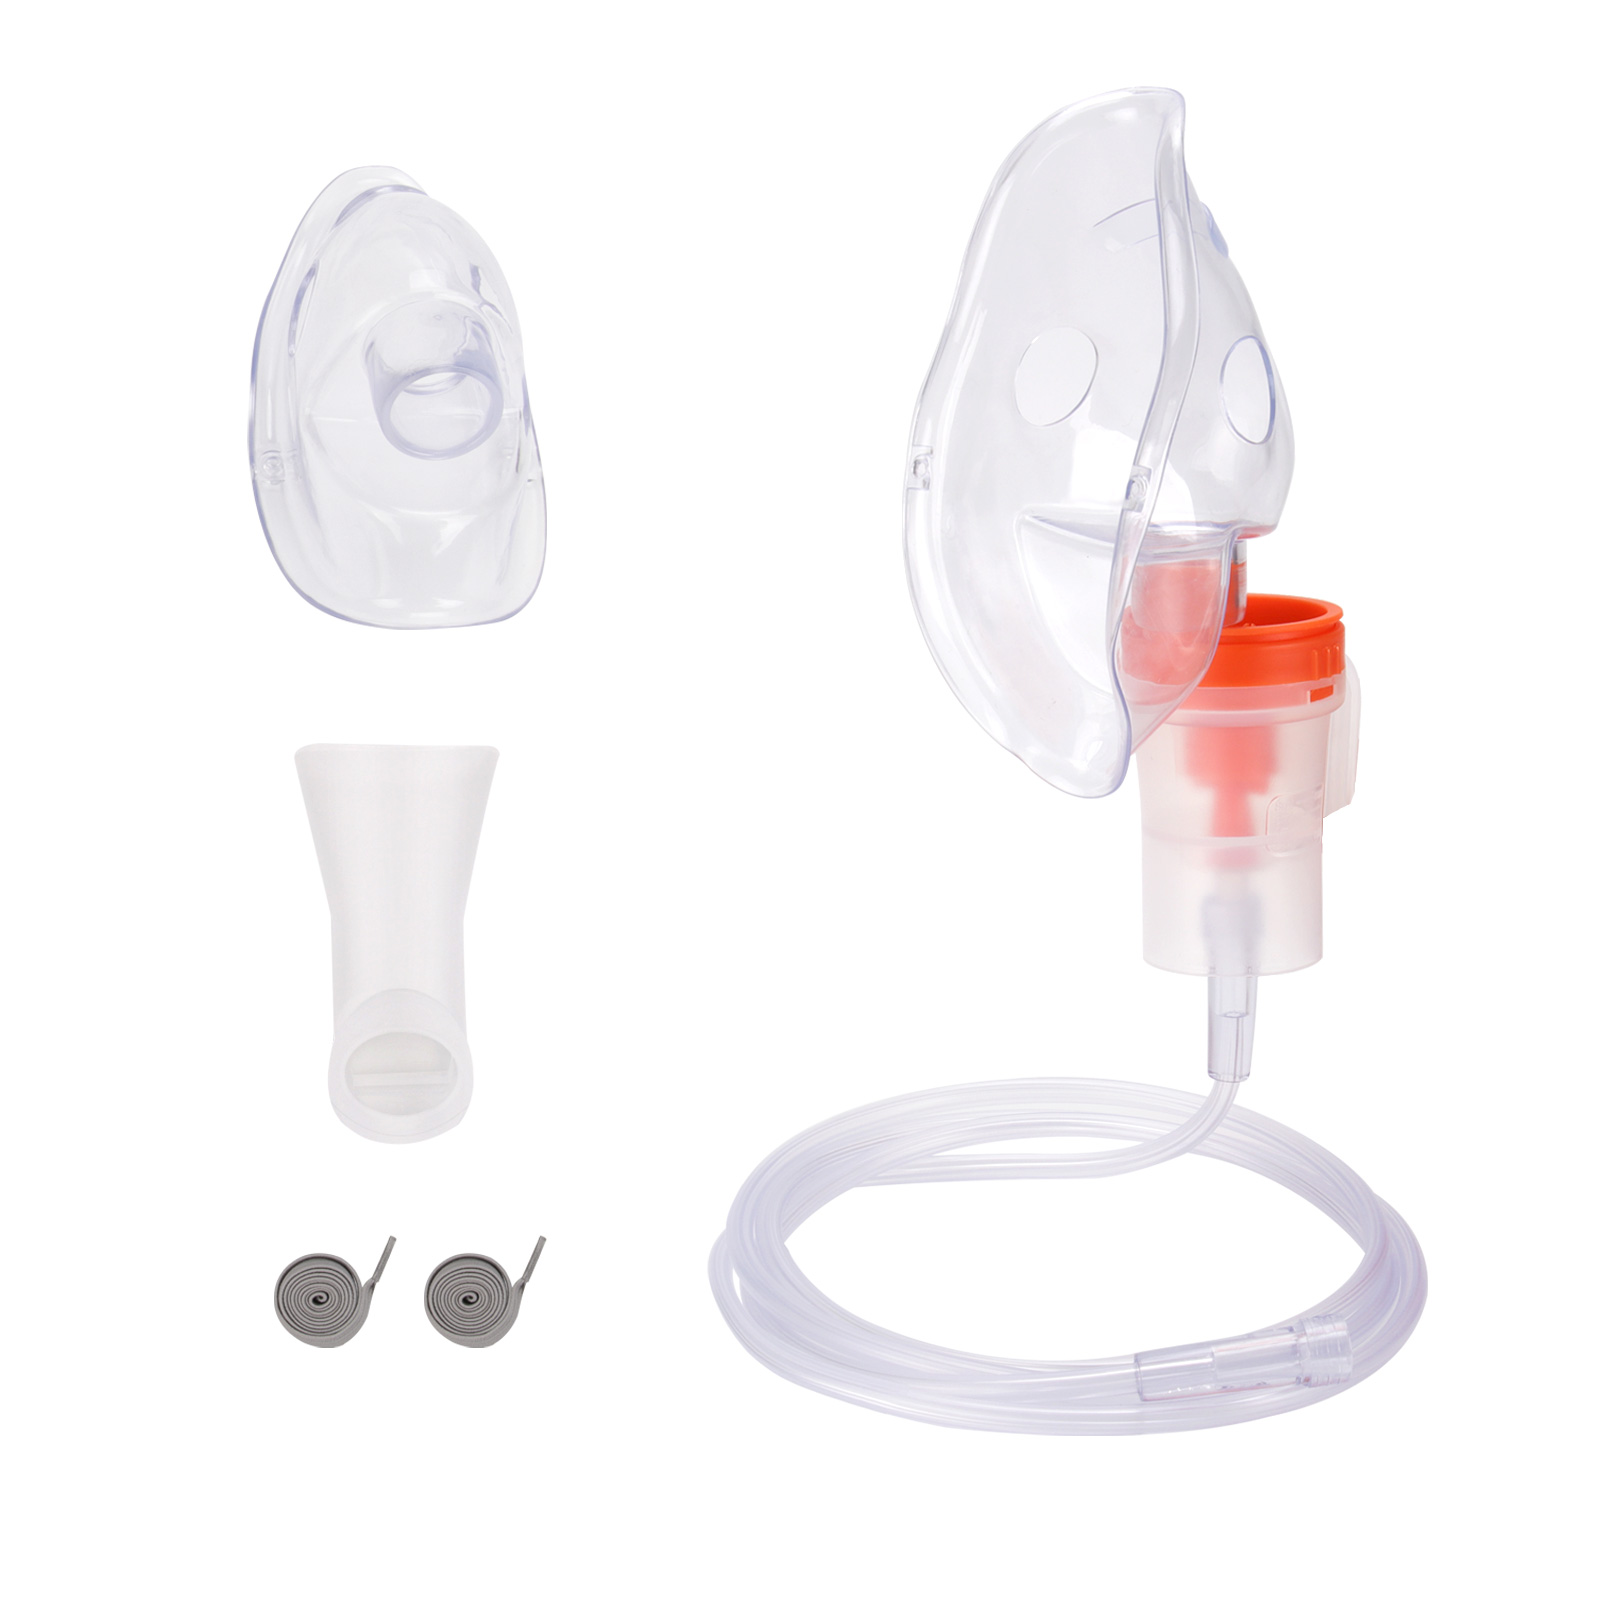 Nebulizer Replacement Parts Tubing Cup Mouthpiece for Adult and Child Use 